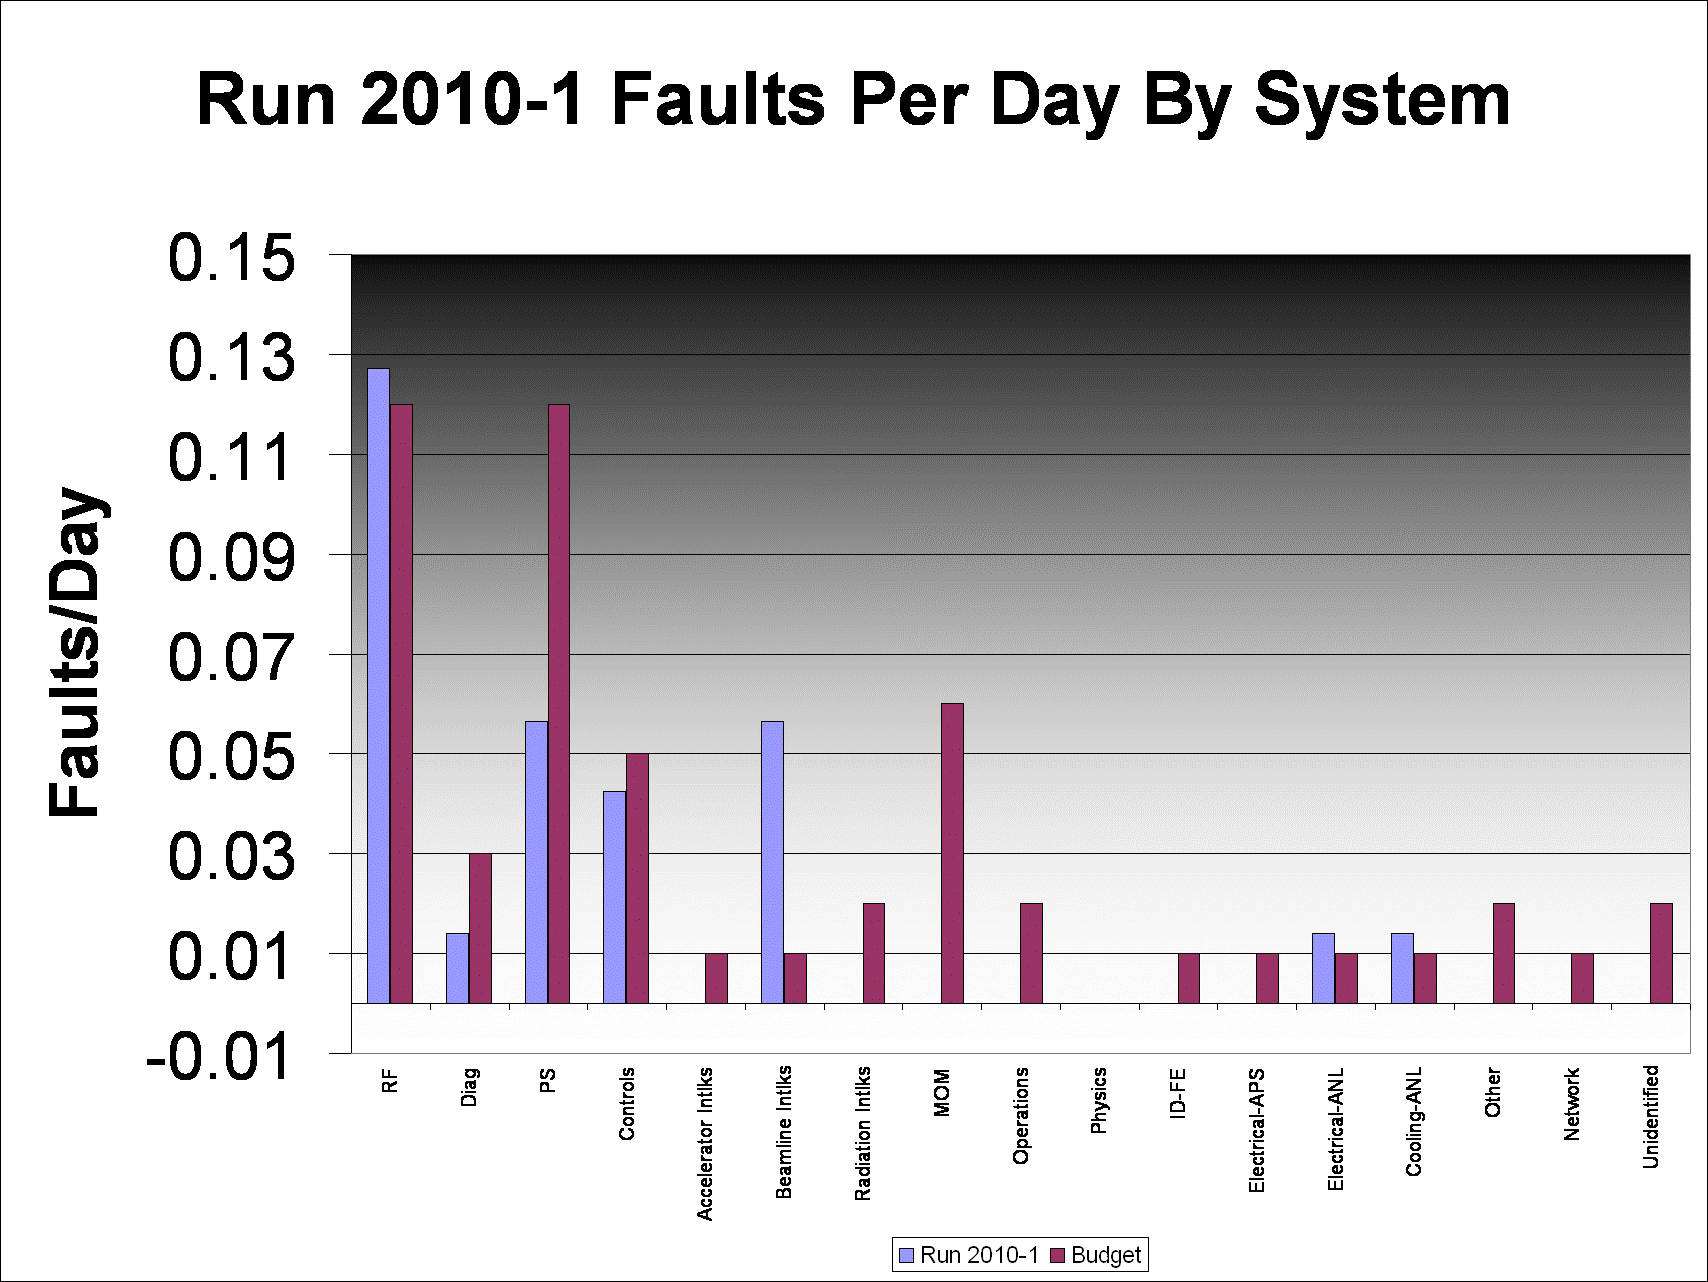 Run 2010-1 Faults Per Day By System